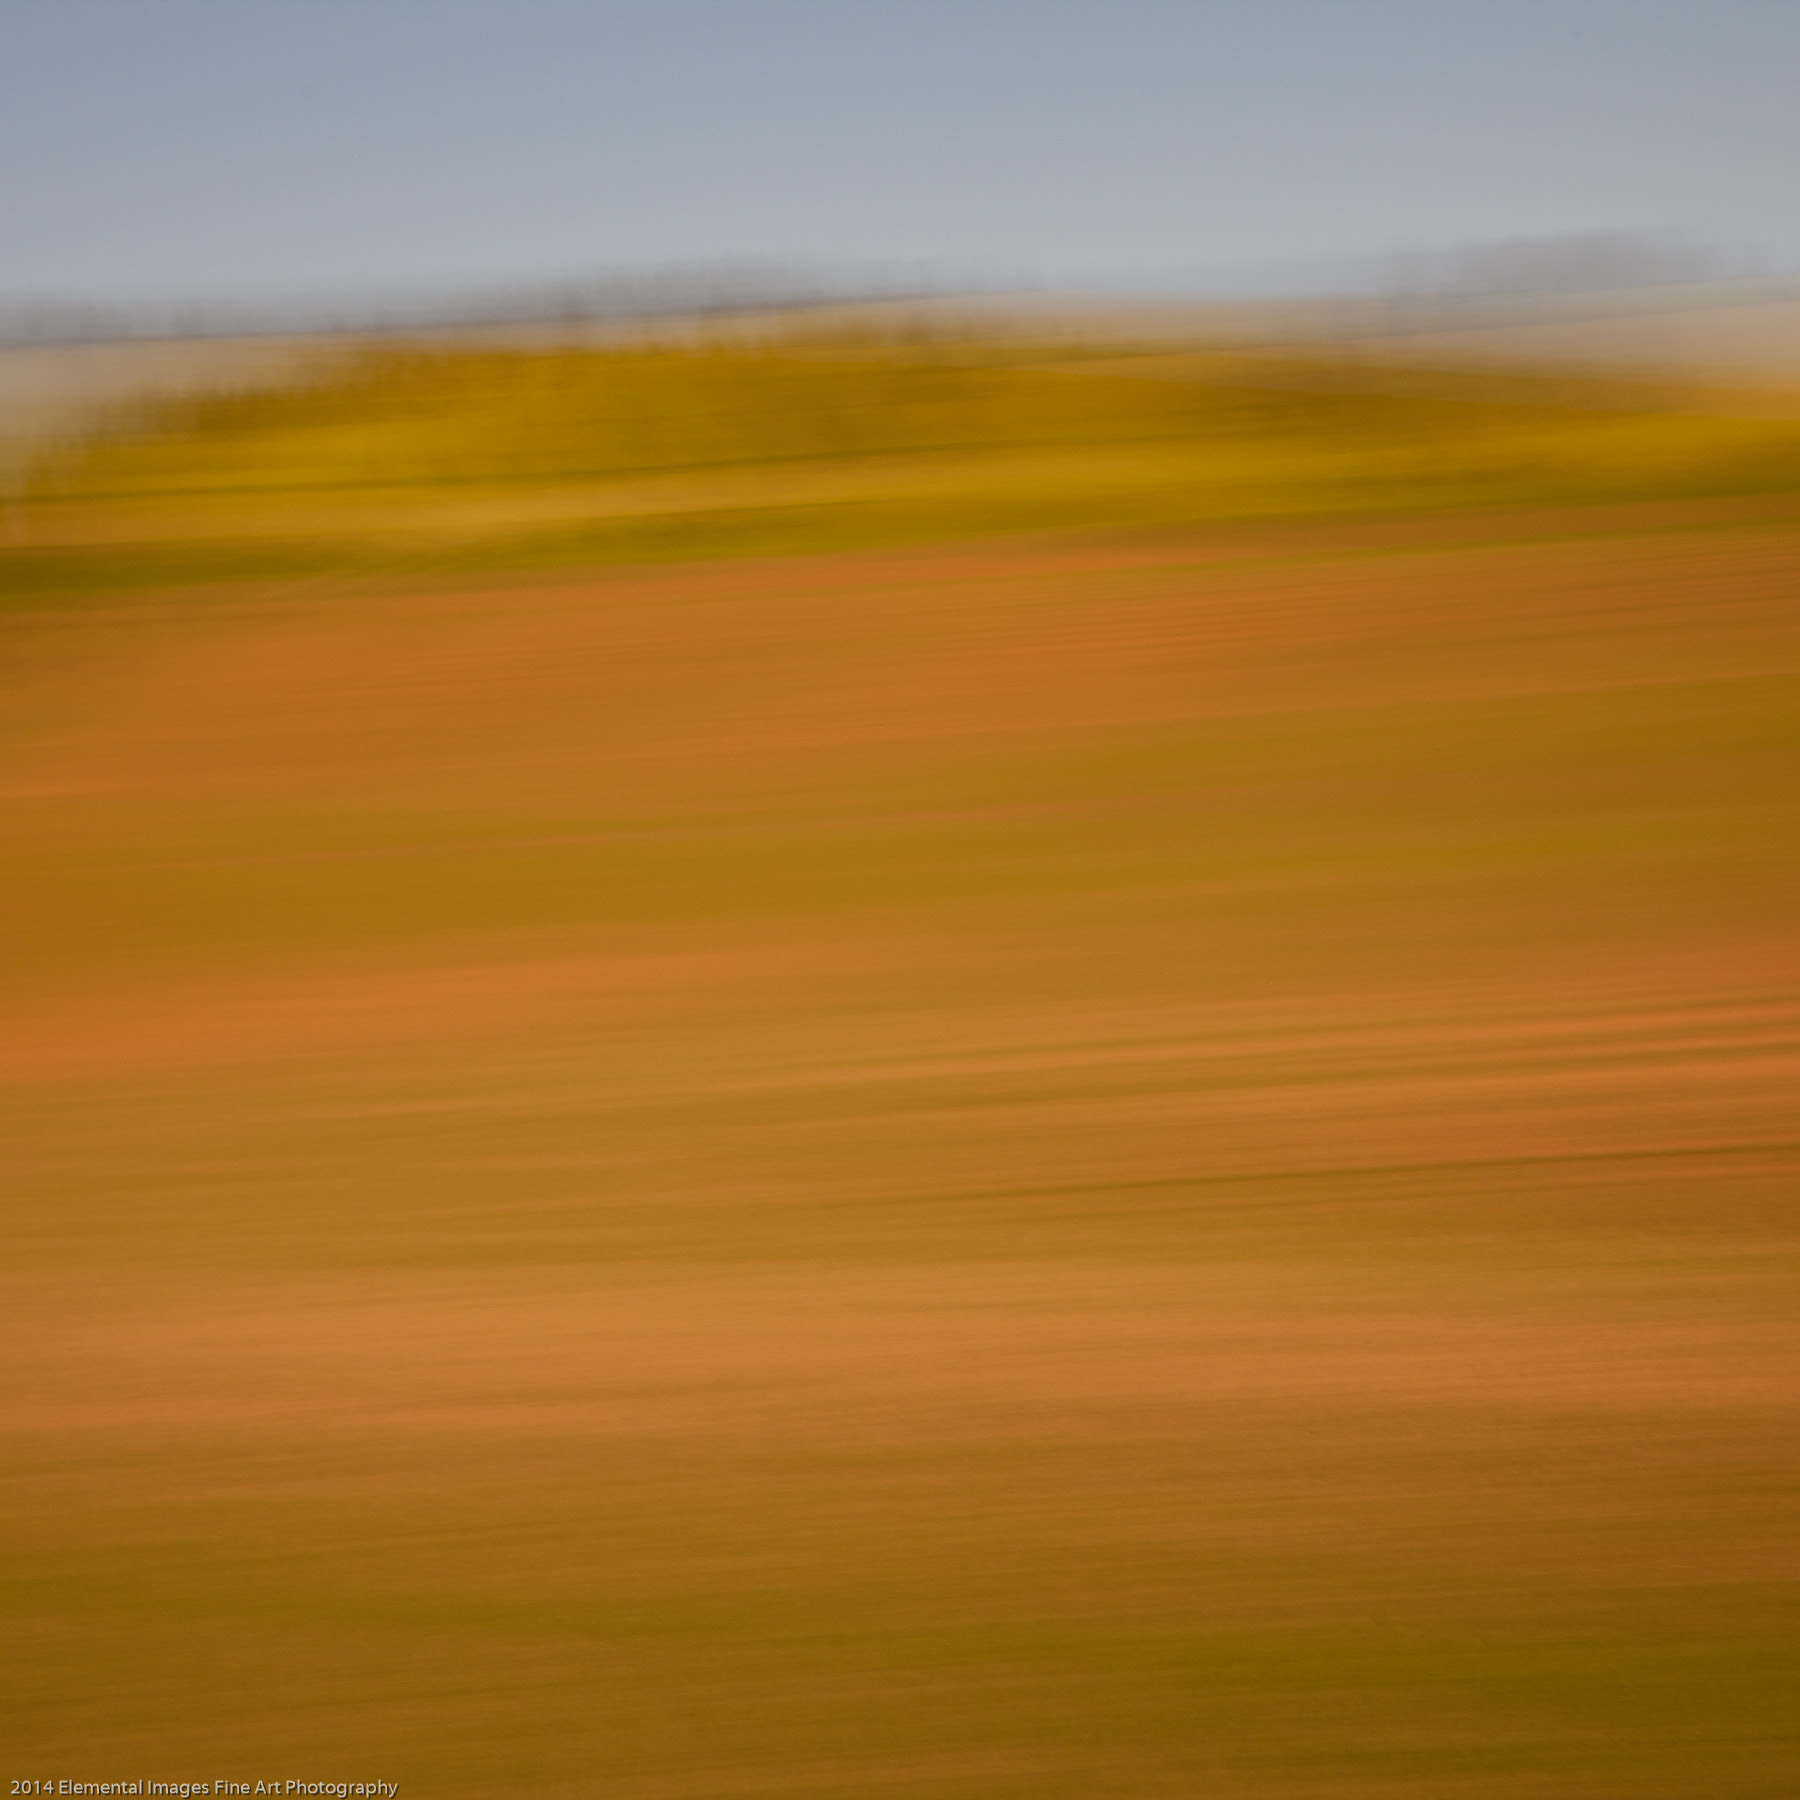 Palouse LXXII | The Palouse | WA | USA - © 2014 Elemental Images Fine Art Photography - All Rights Reserved Worldwide